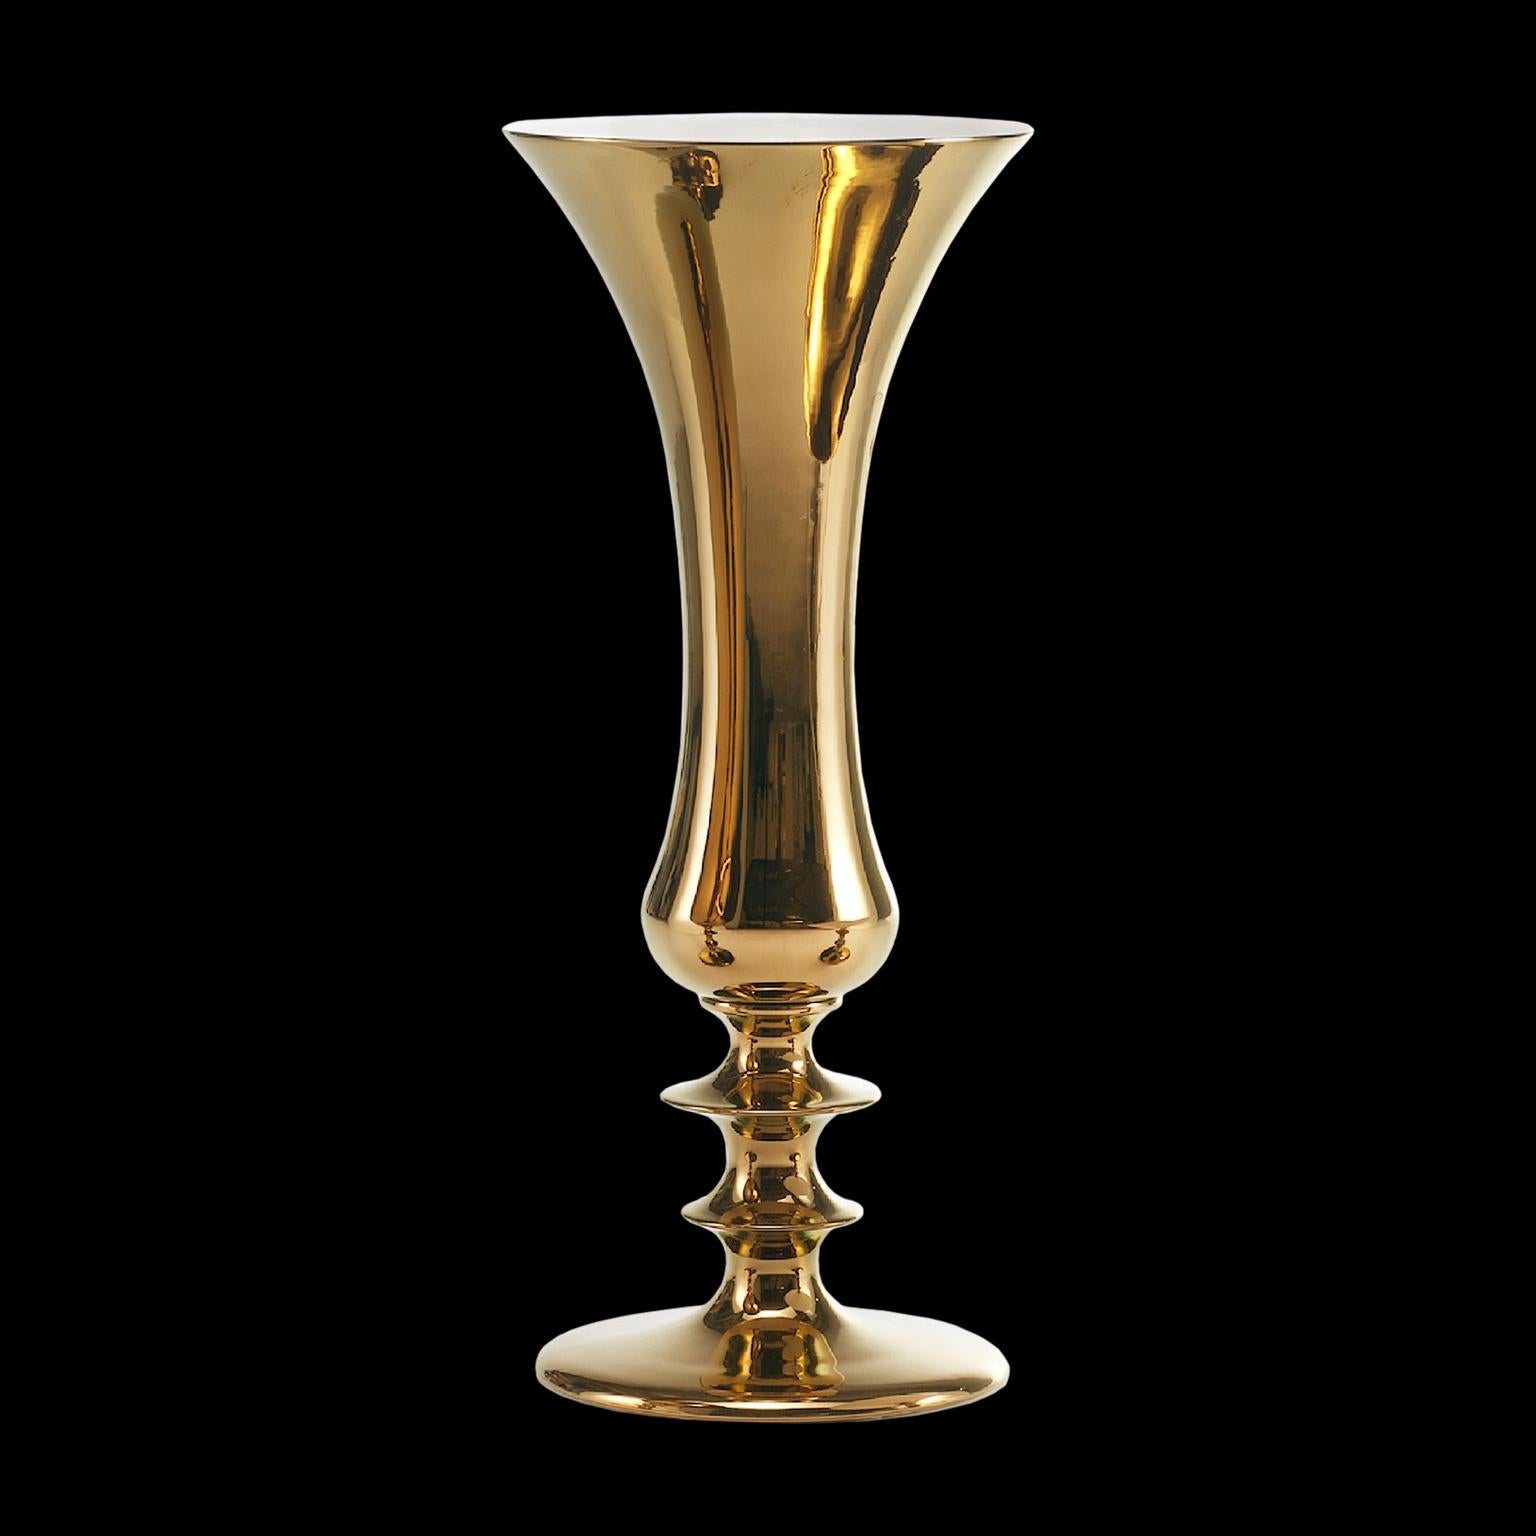 Ceramic cup ANNE II
cod. CP115
handcrafted in bronze 
with white enamel inside

measures: 
H. 90.0 cm.
Dm. 30.0 cm.

 